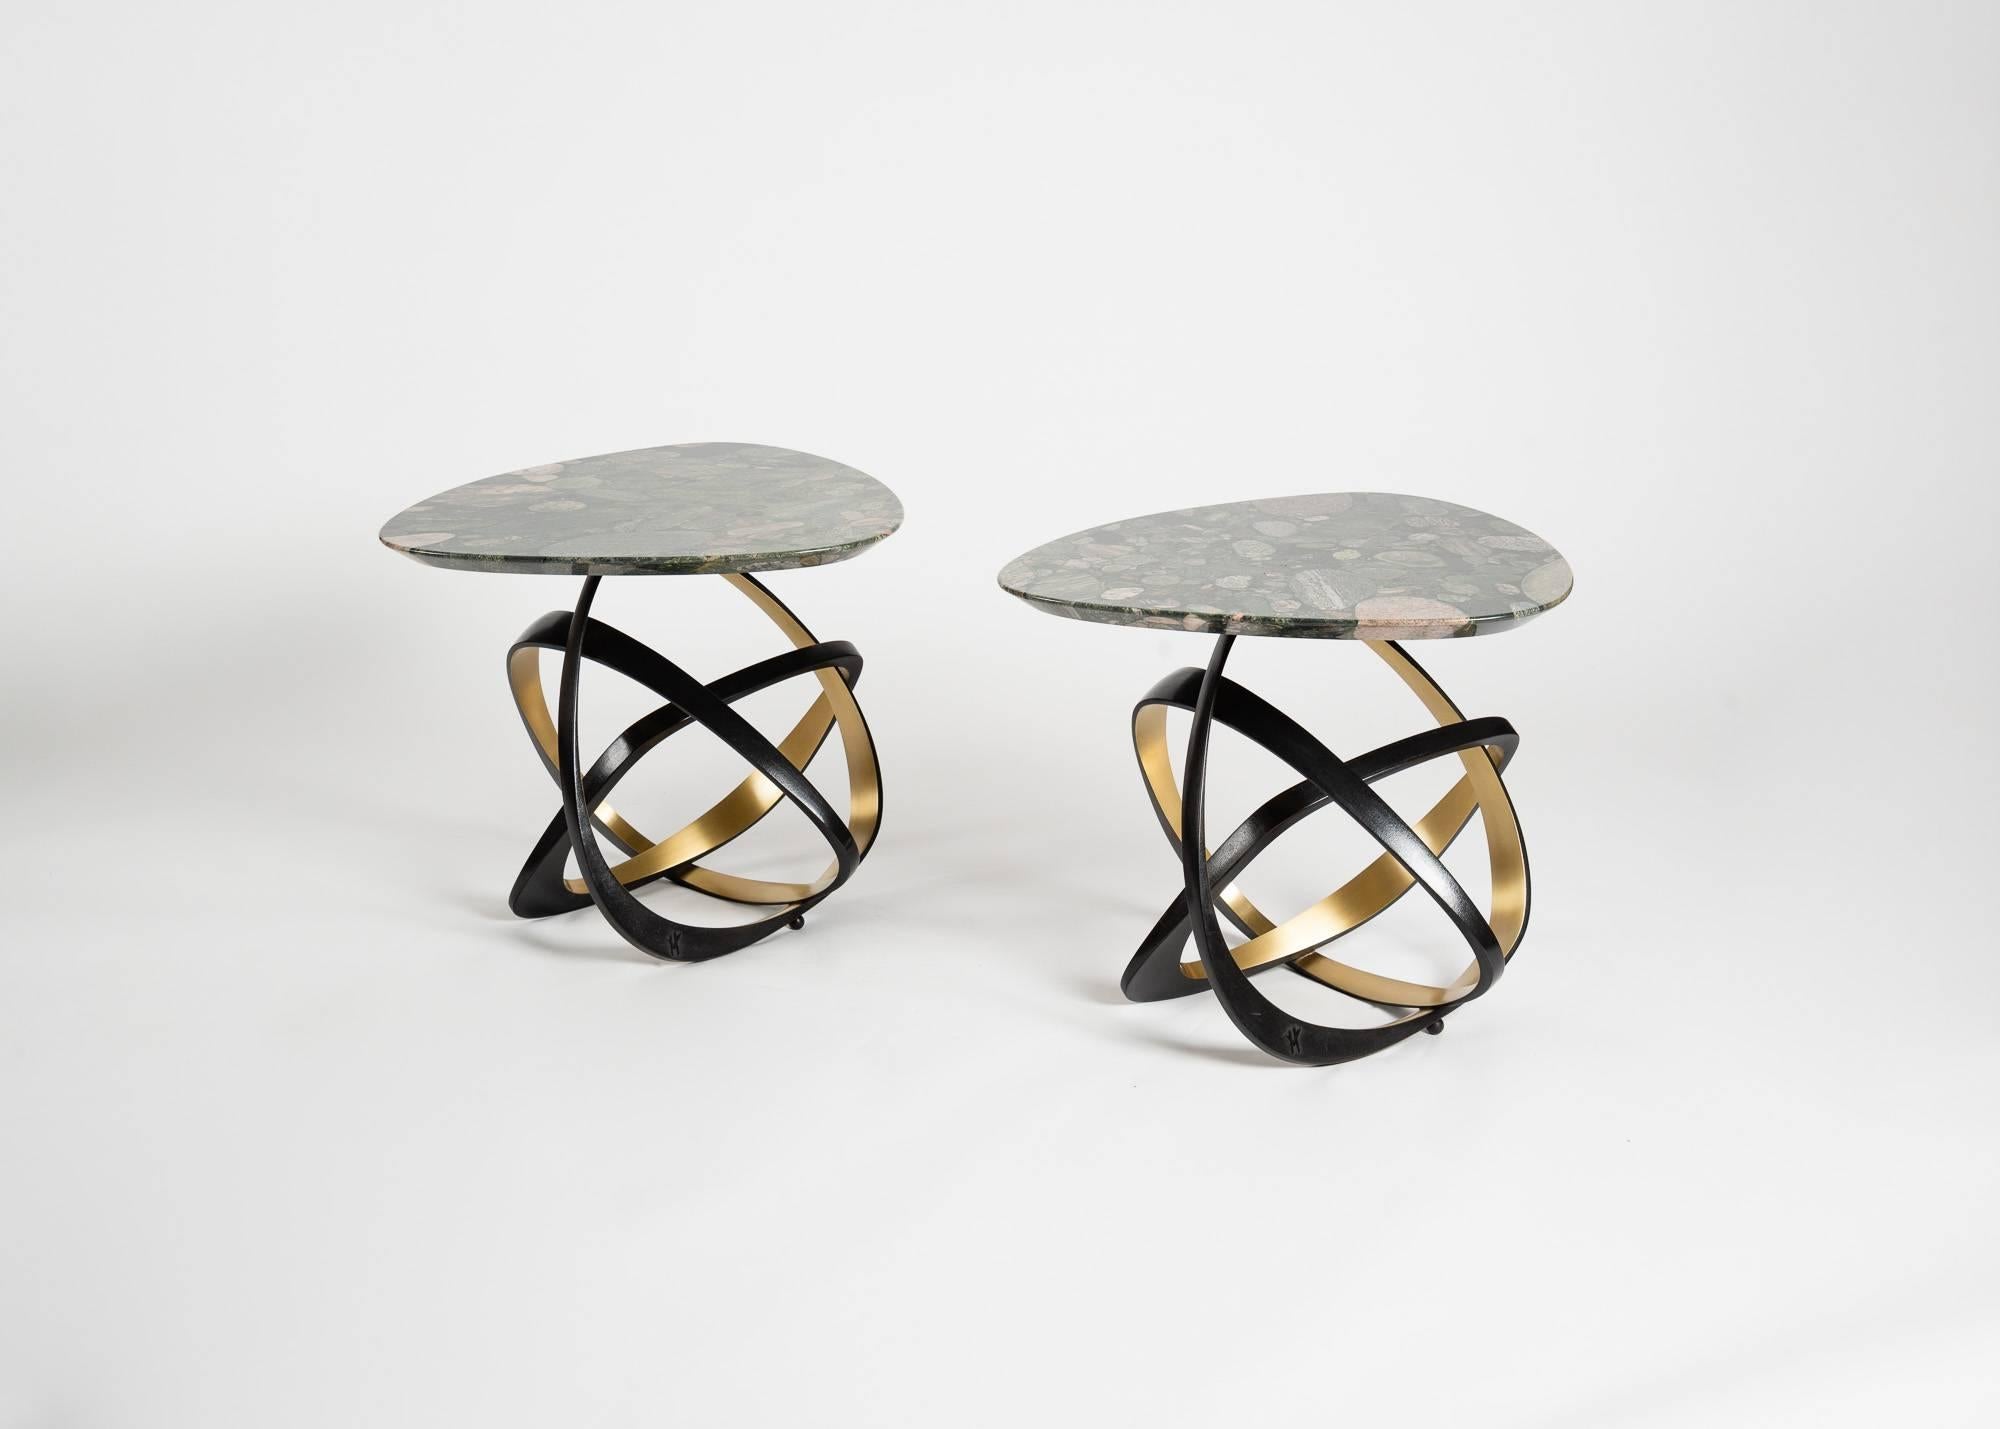 This contemporary table features a marinace marble top set with cross-sectioned stones, as well as three lopsided bronze supports, each with a gilt bronze facet. These dynamic metal rings provide a light, airy aesthetic and successfully evince space